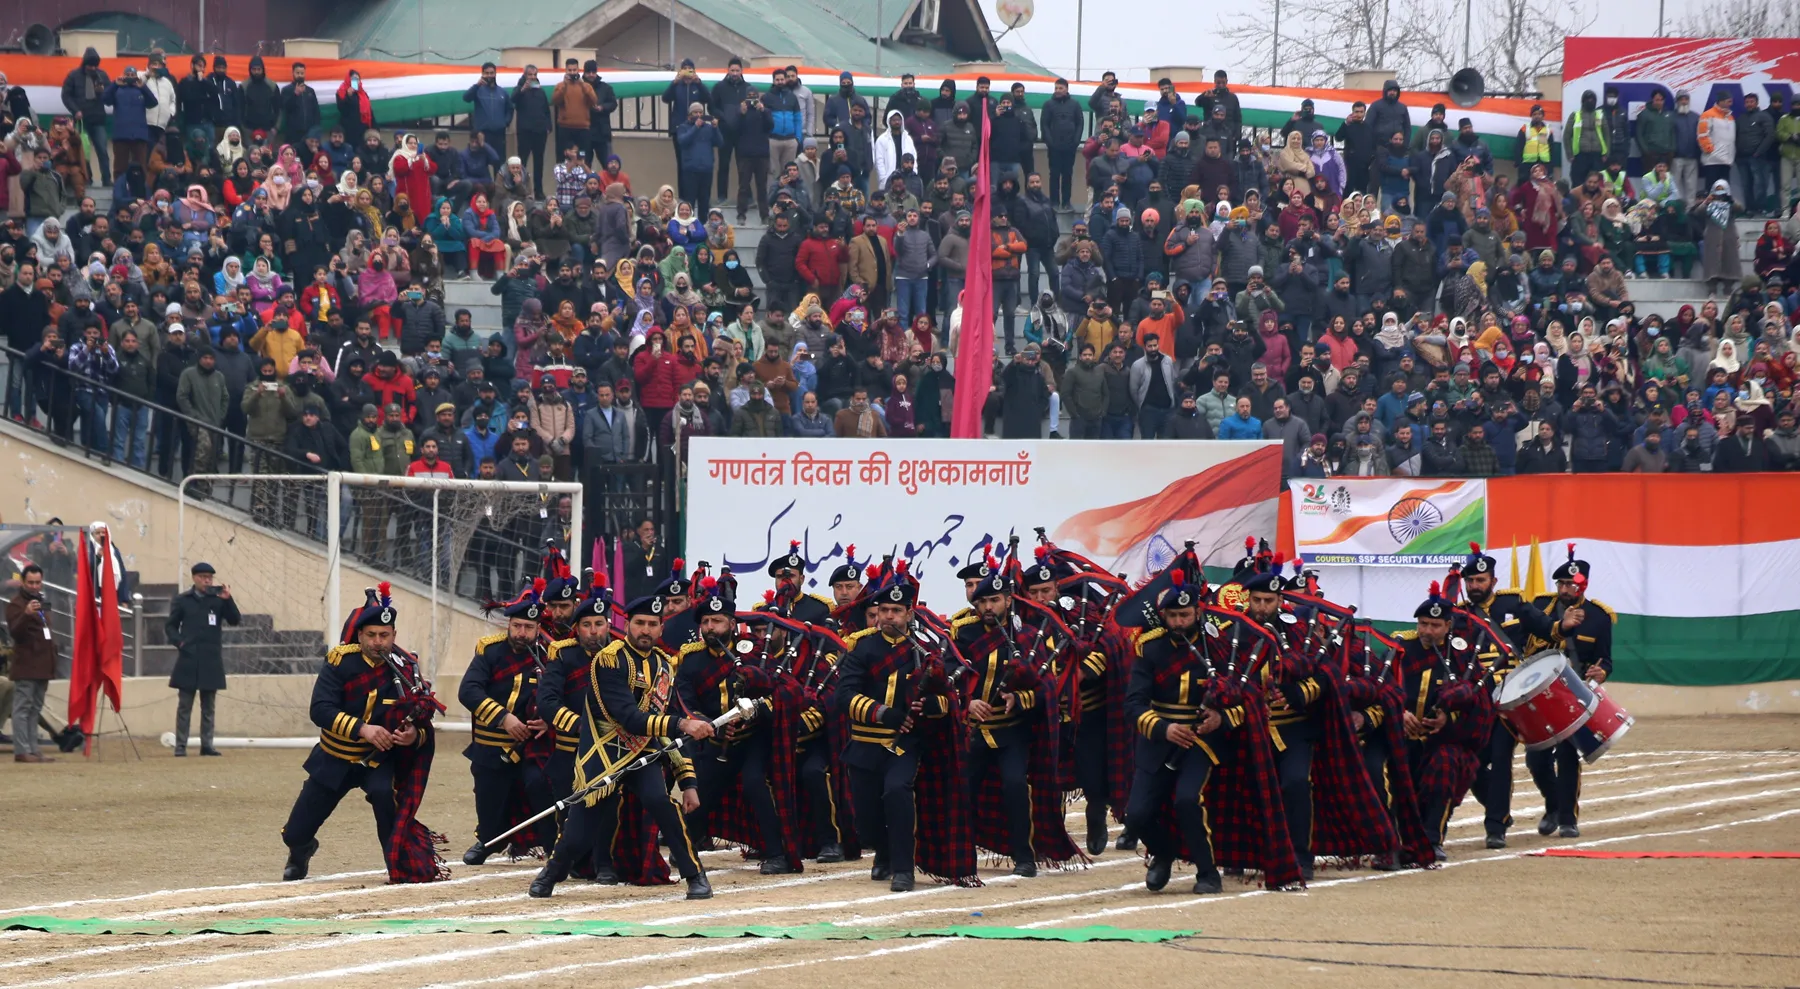 A J&K Police band performs during the Republic Day function at Bakshi stadium in Srinagar on Friday. Mubashir Khan for Greater Kashmir